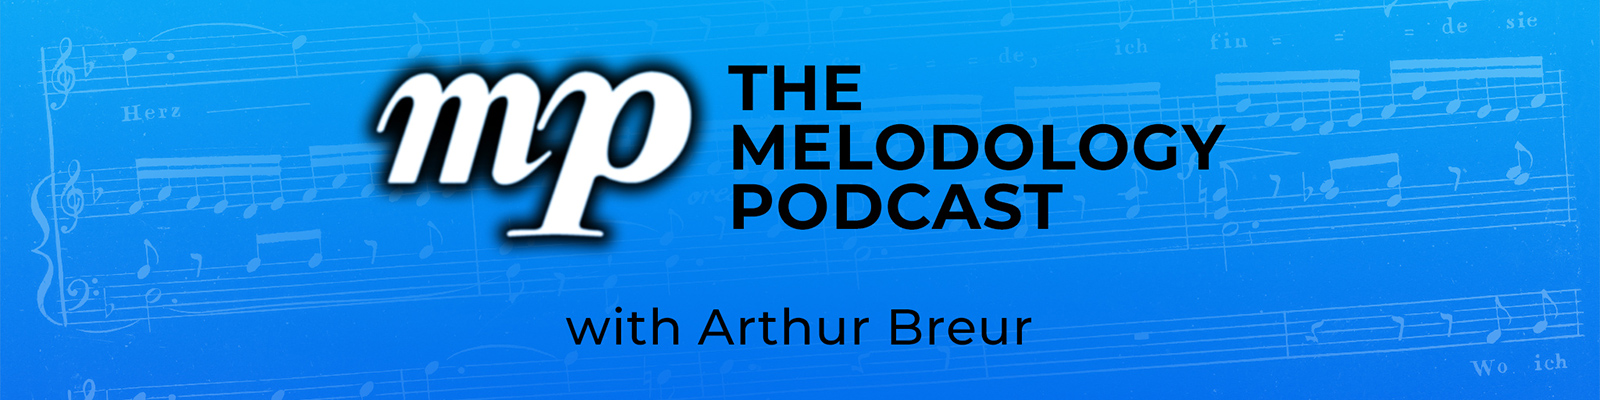 The Melodology Podcast with Arthur Breur